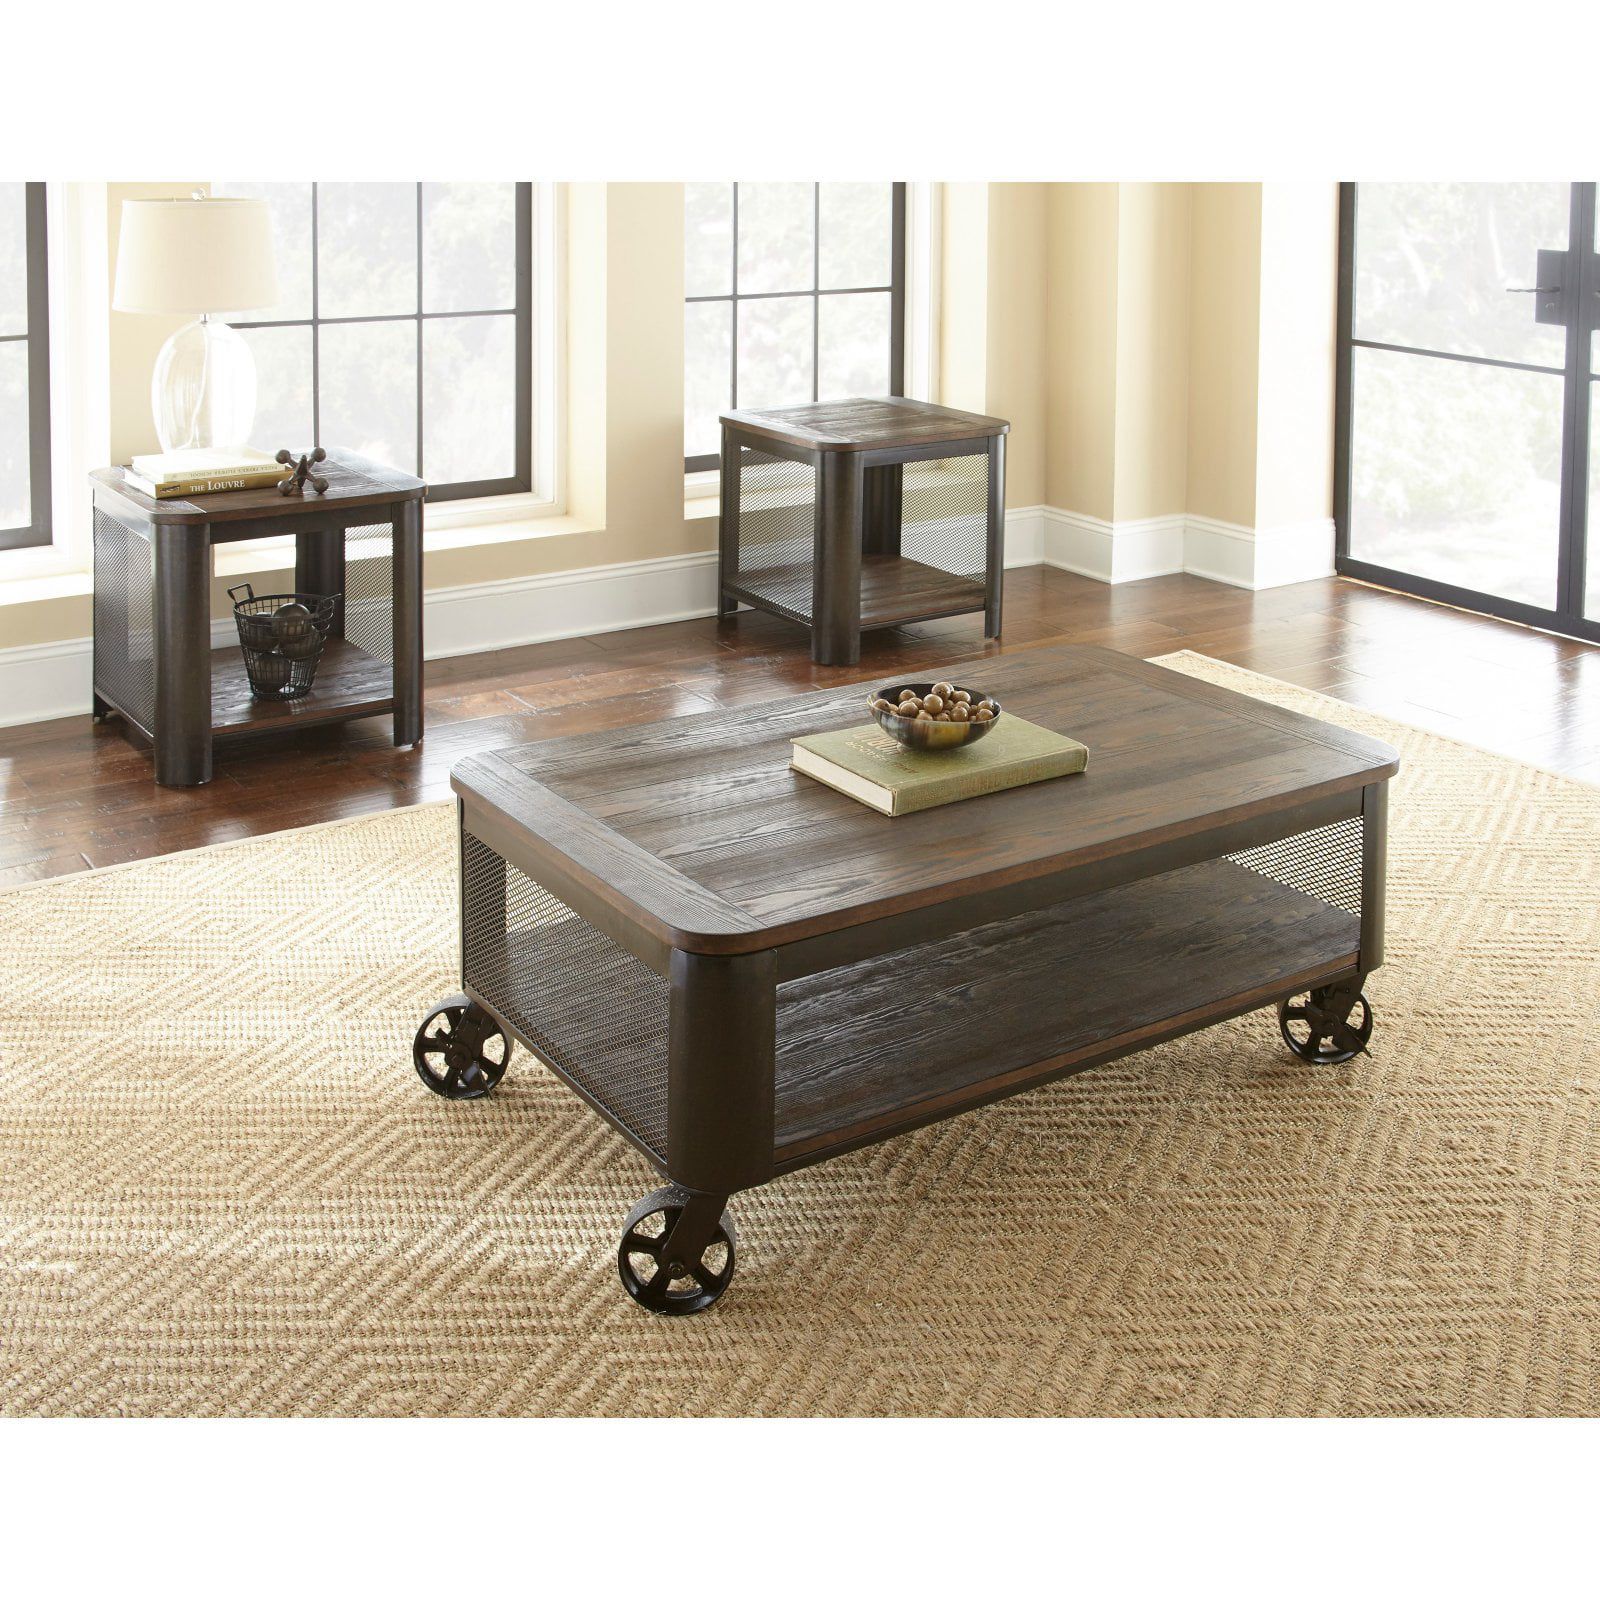 Barrow Lift Top Cocktail Table With Casters – Walmart Throughout Coffee Tables With Casters (View 11 of 21)